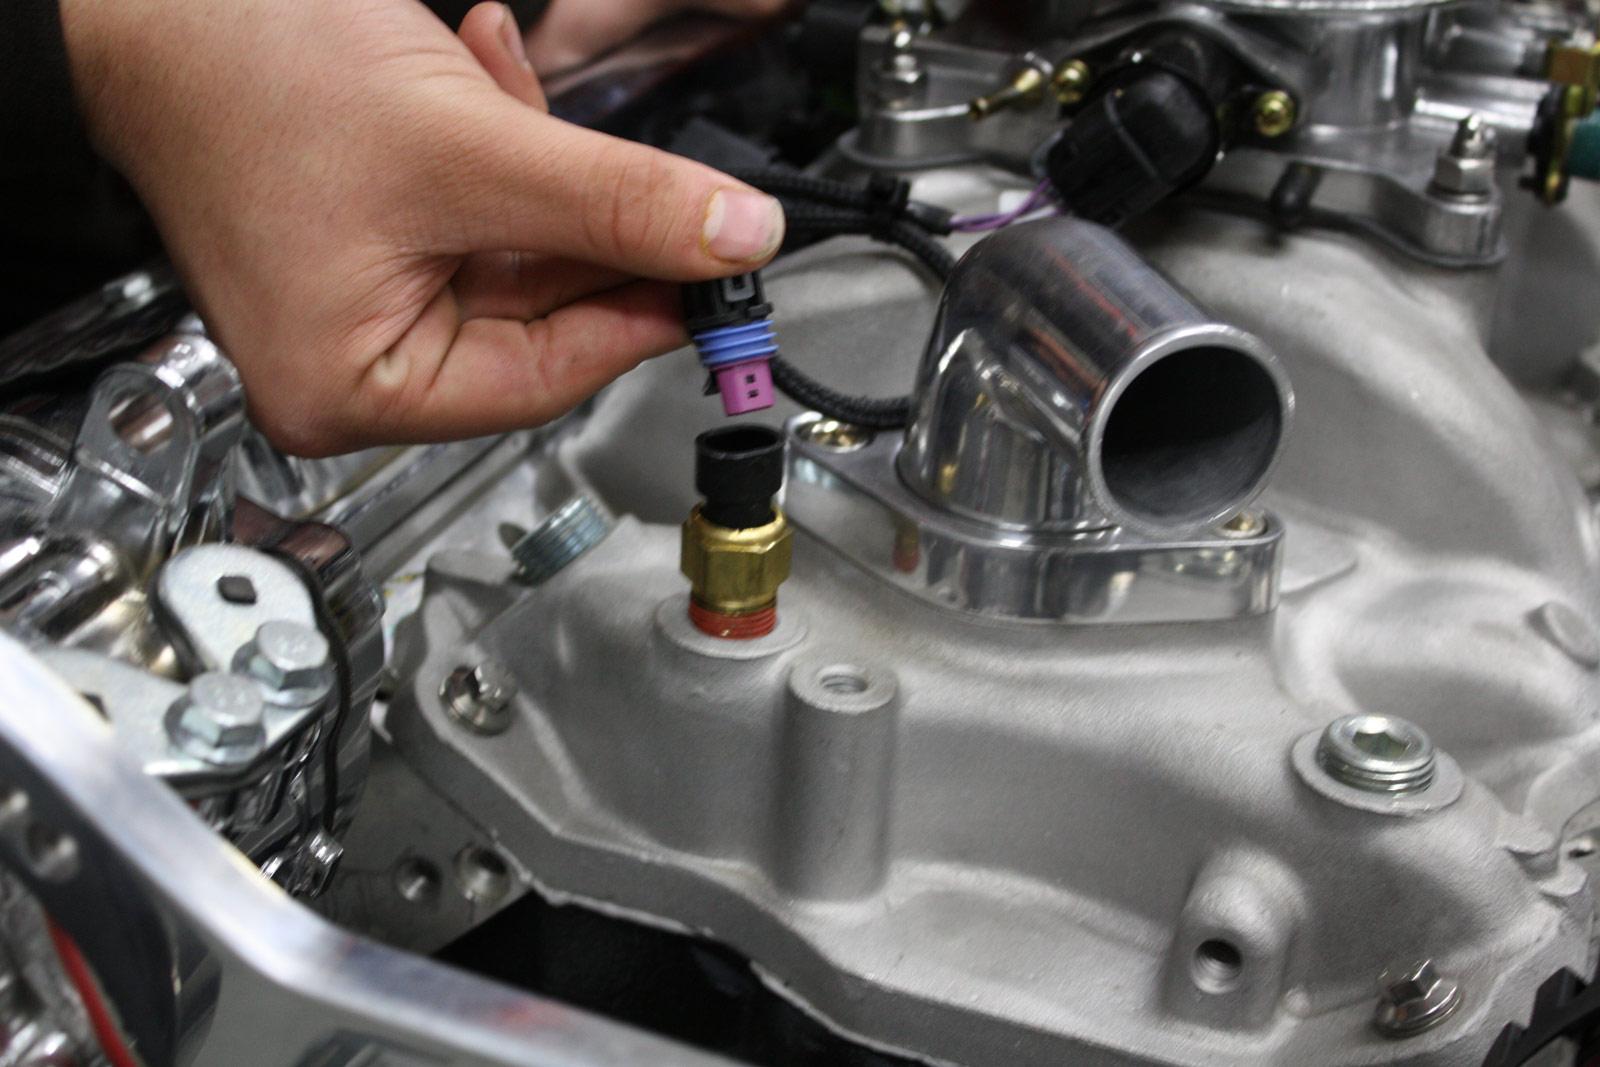 Headed to Test a Coolant Temperature Sensor? Here’s How to ... 1972 chevy blazer wiring harness 